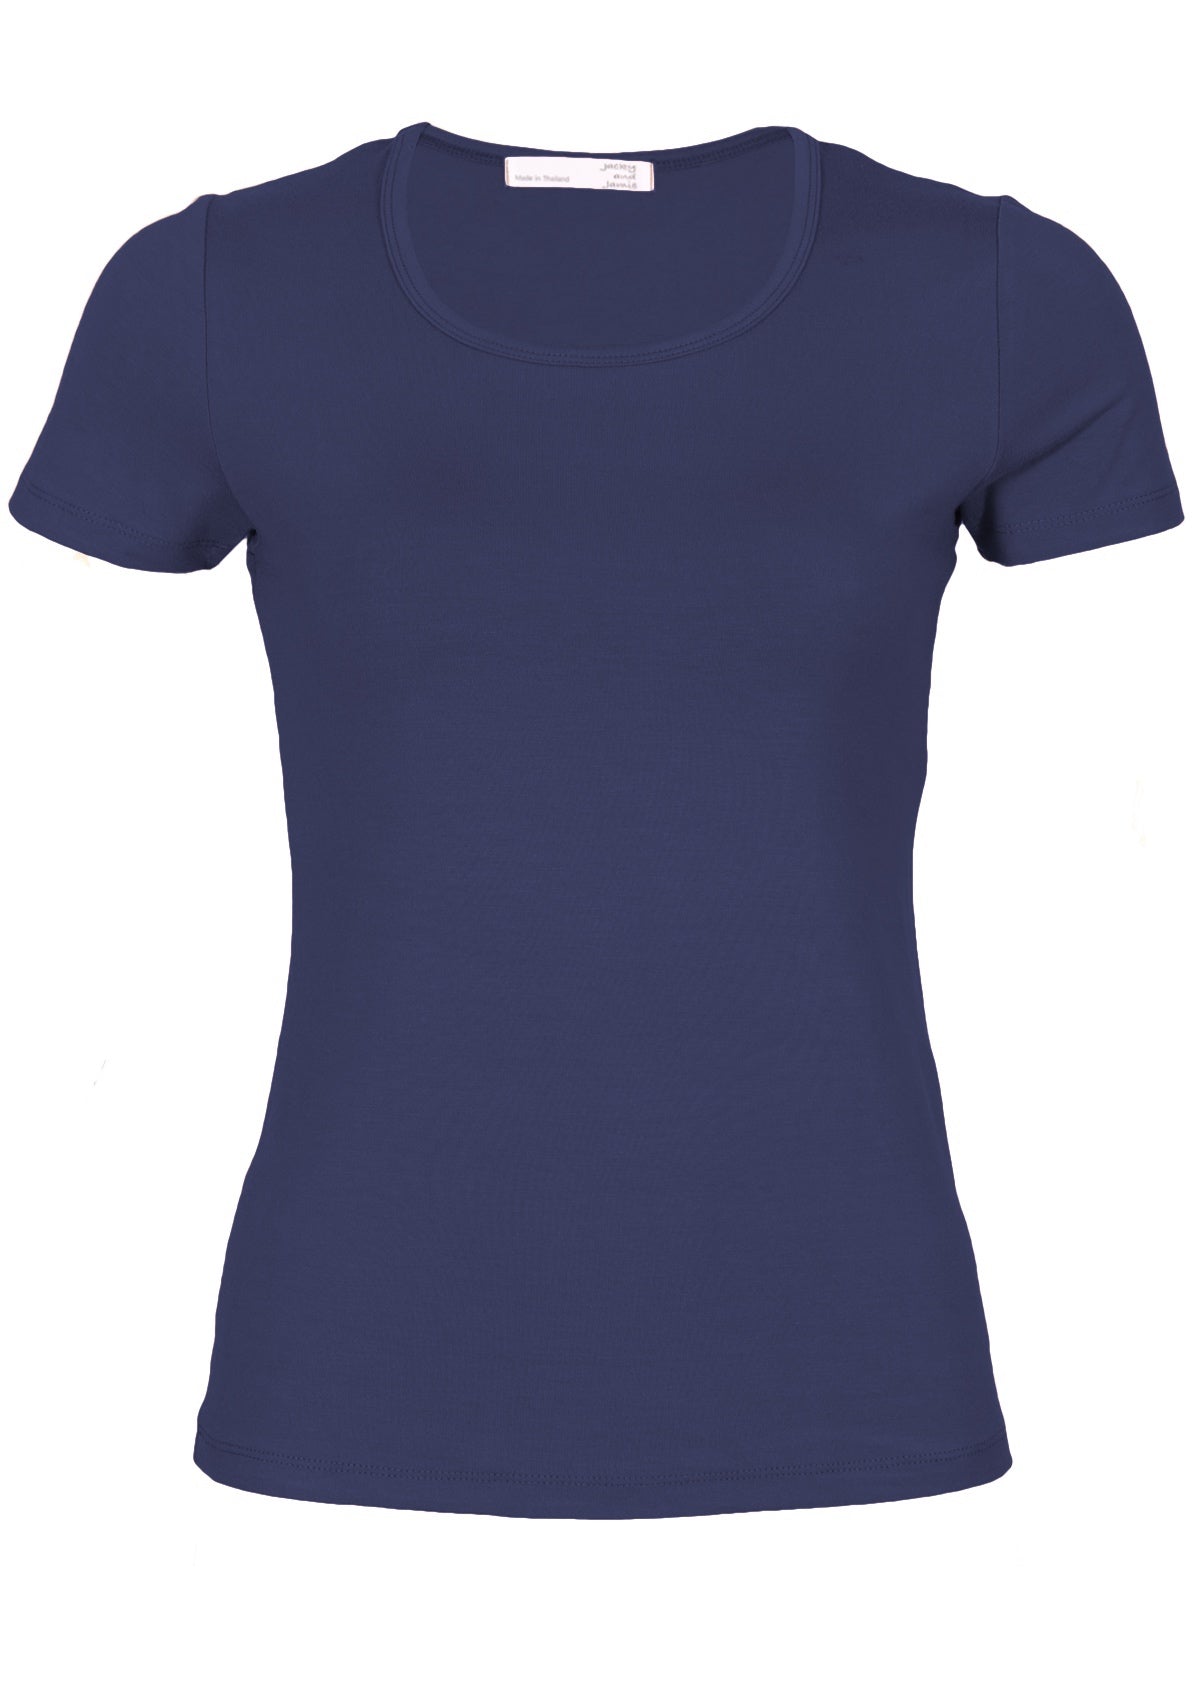 Front view of women's scoop neck navy blue rayon fitted t-shirt.